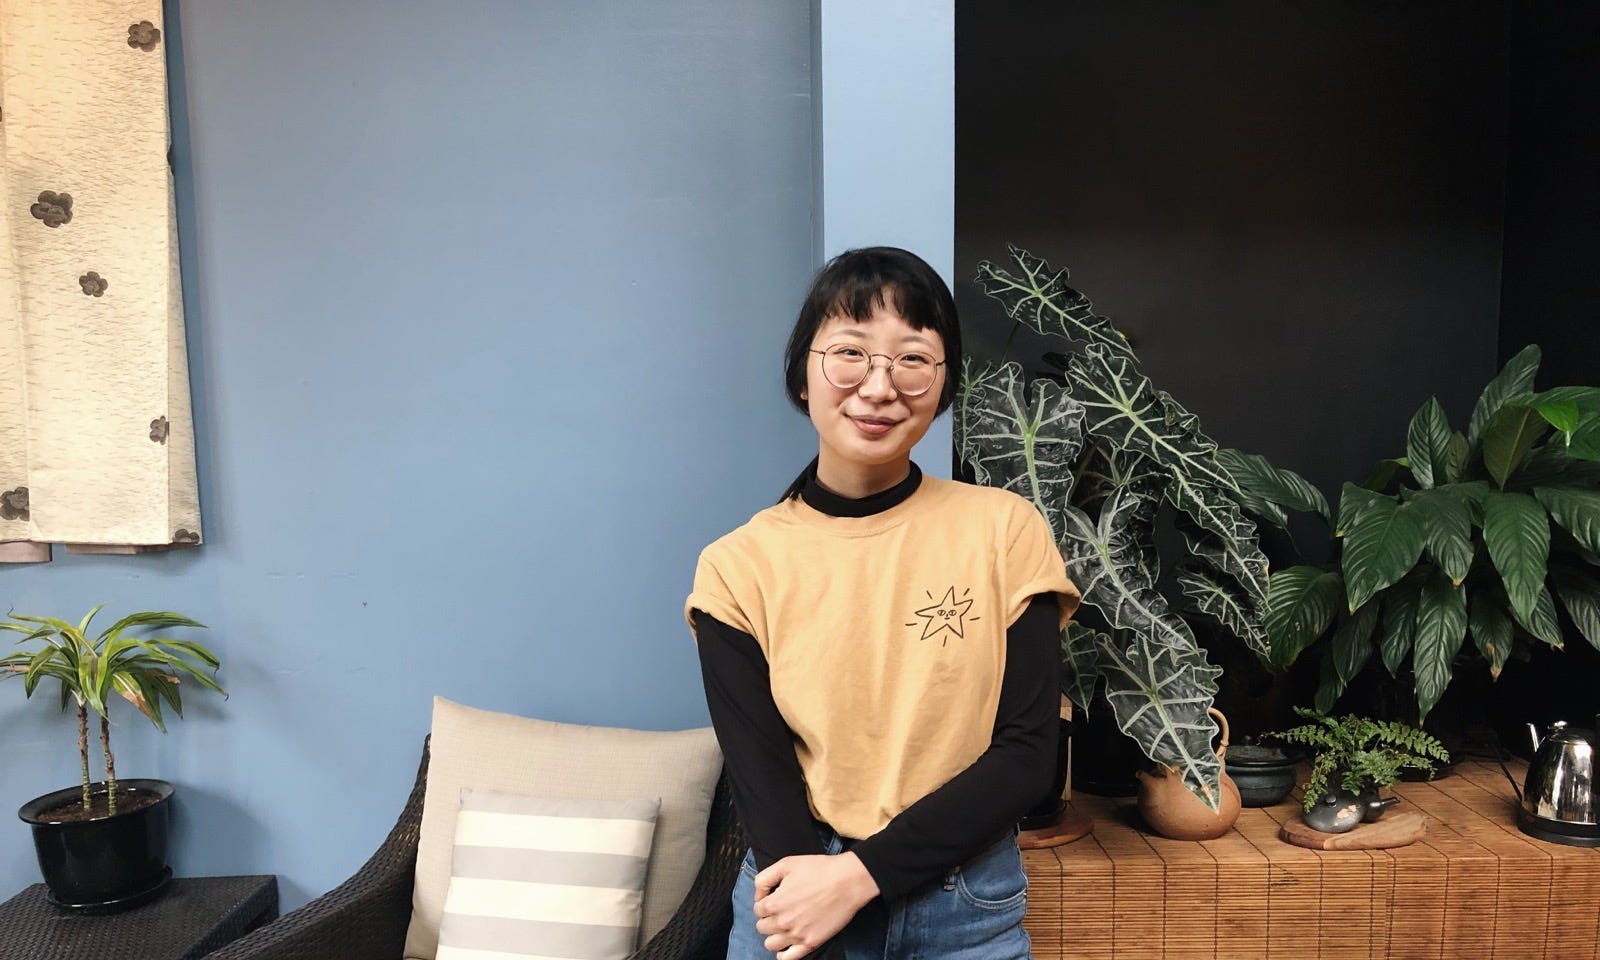 Tiffany Trieu in yellow shirt posing in front of blue wall and indoor plants.